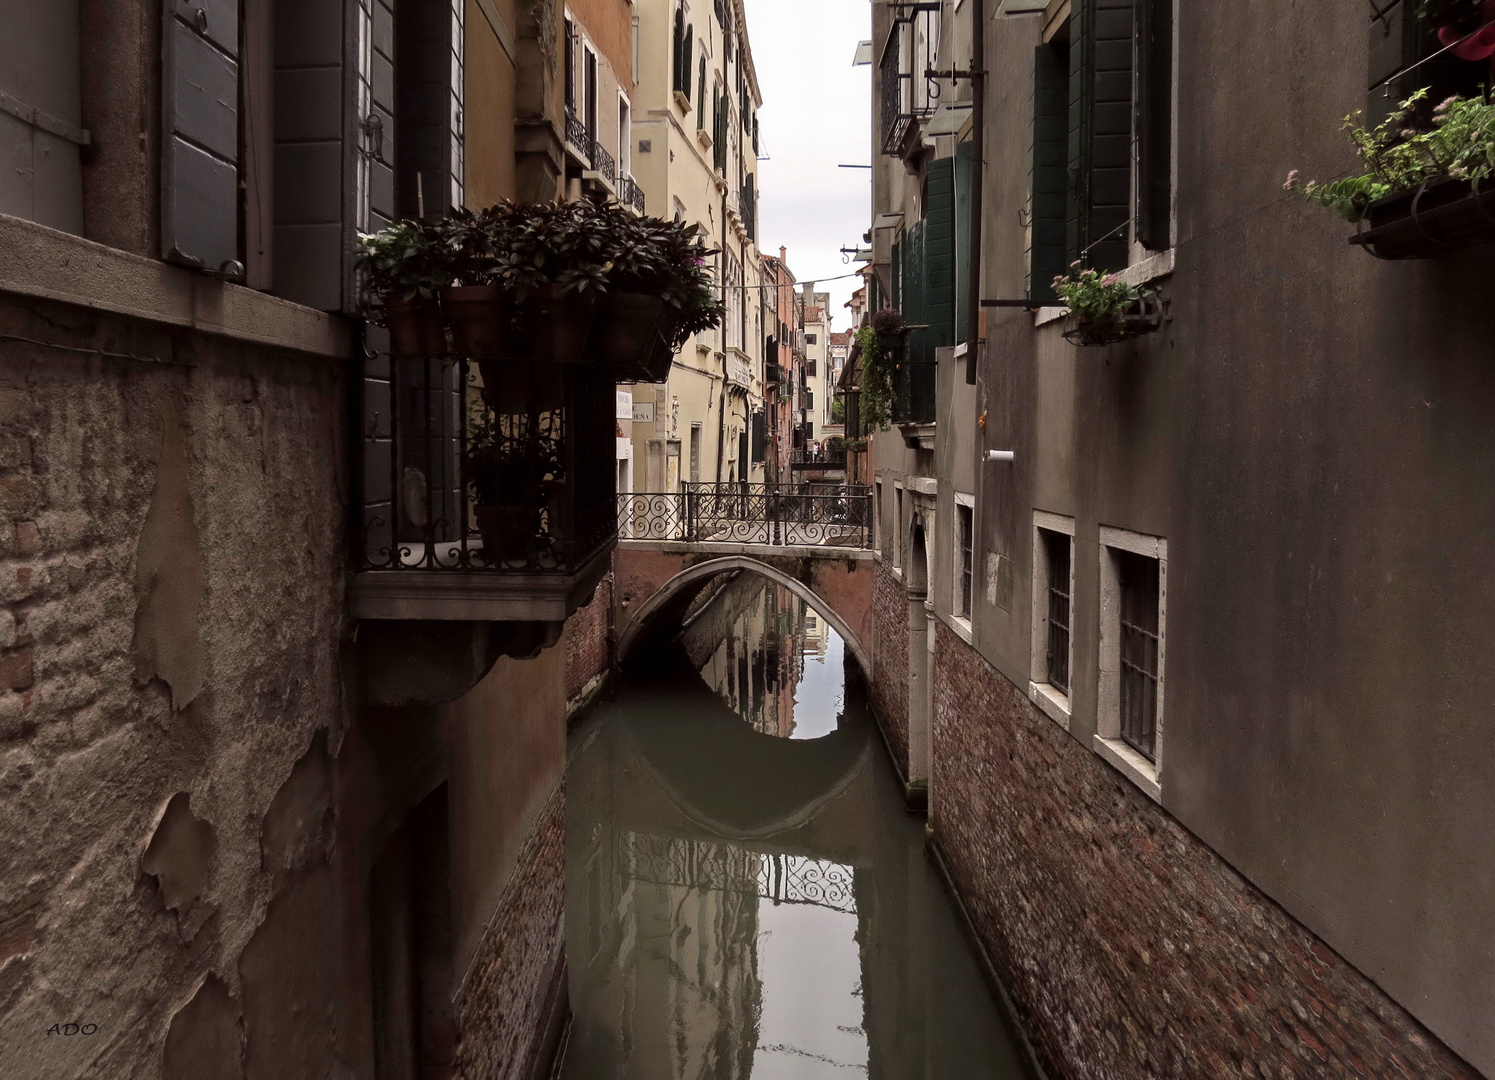 The Charm of Venice